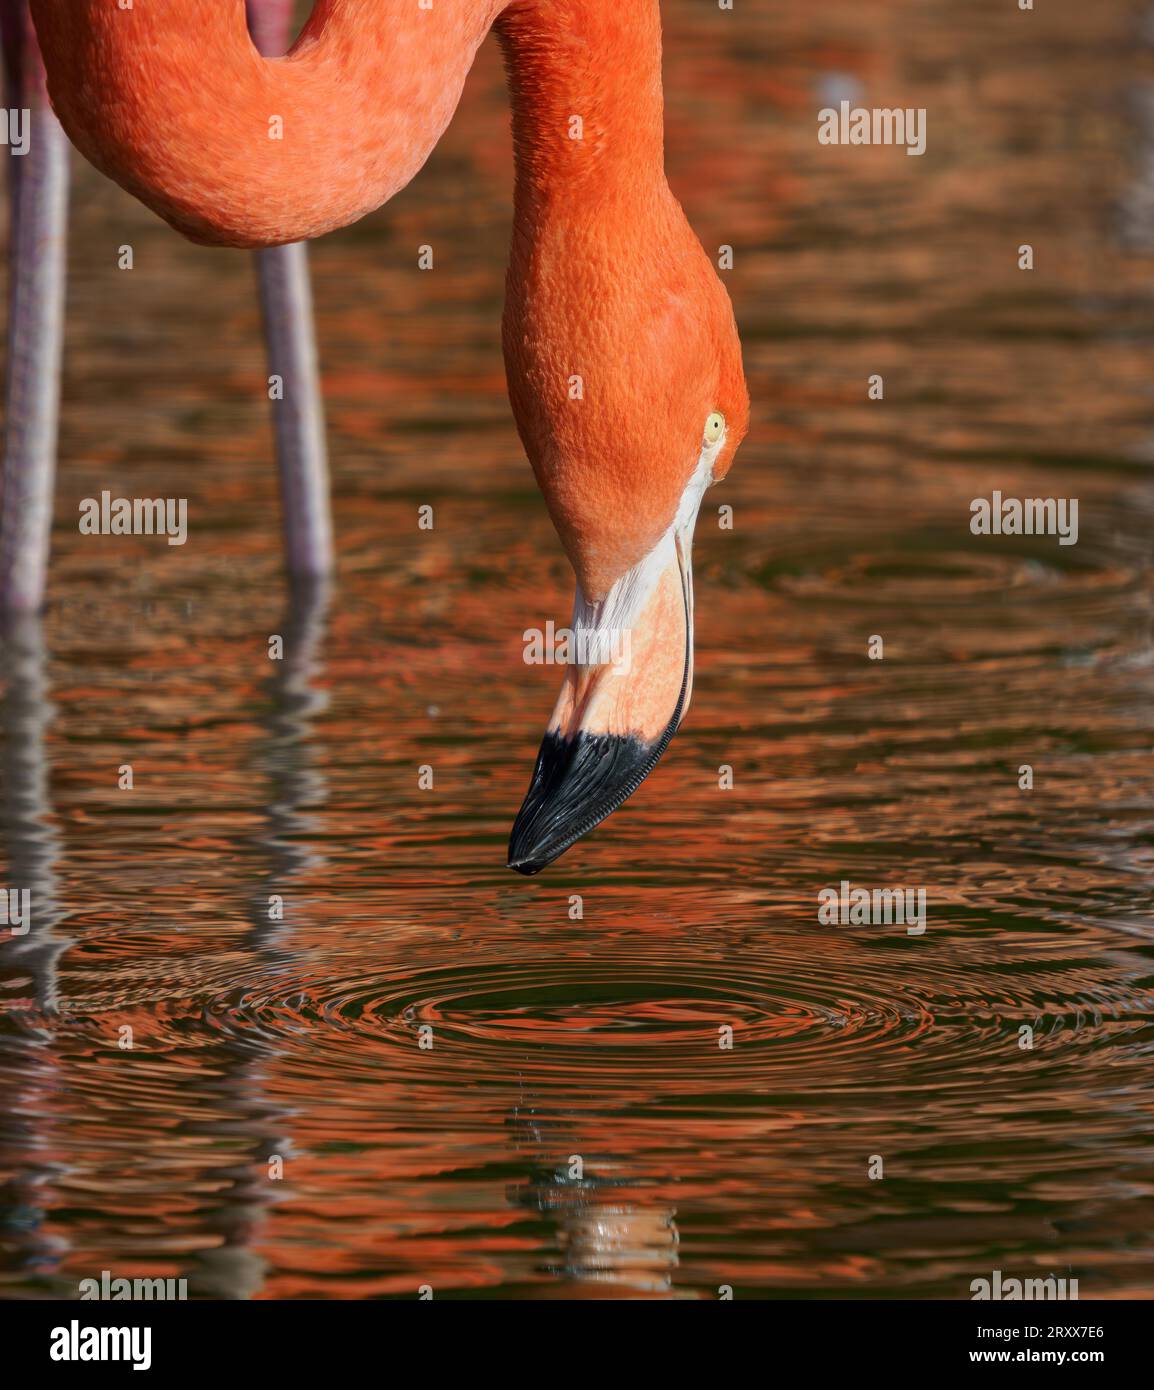 Caribbean or American Flamingo Phoenicopterus ruber ruber at Slimbridge Wildfowl and Wetlands Centre in Gloucestershire UK Stock Photo